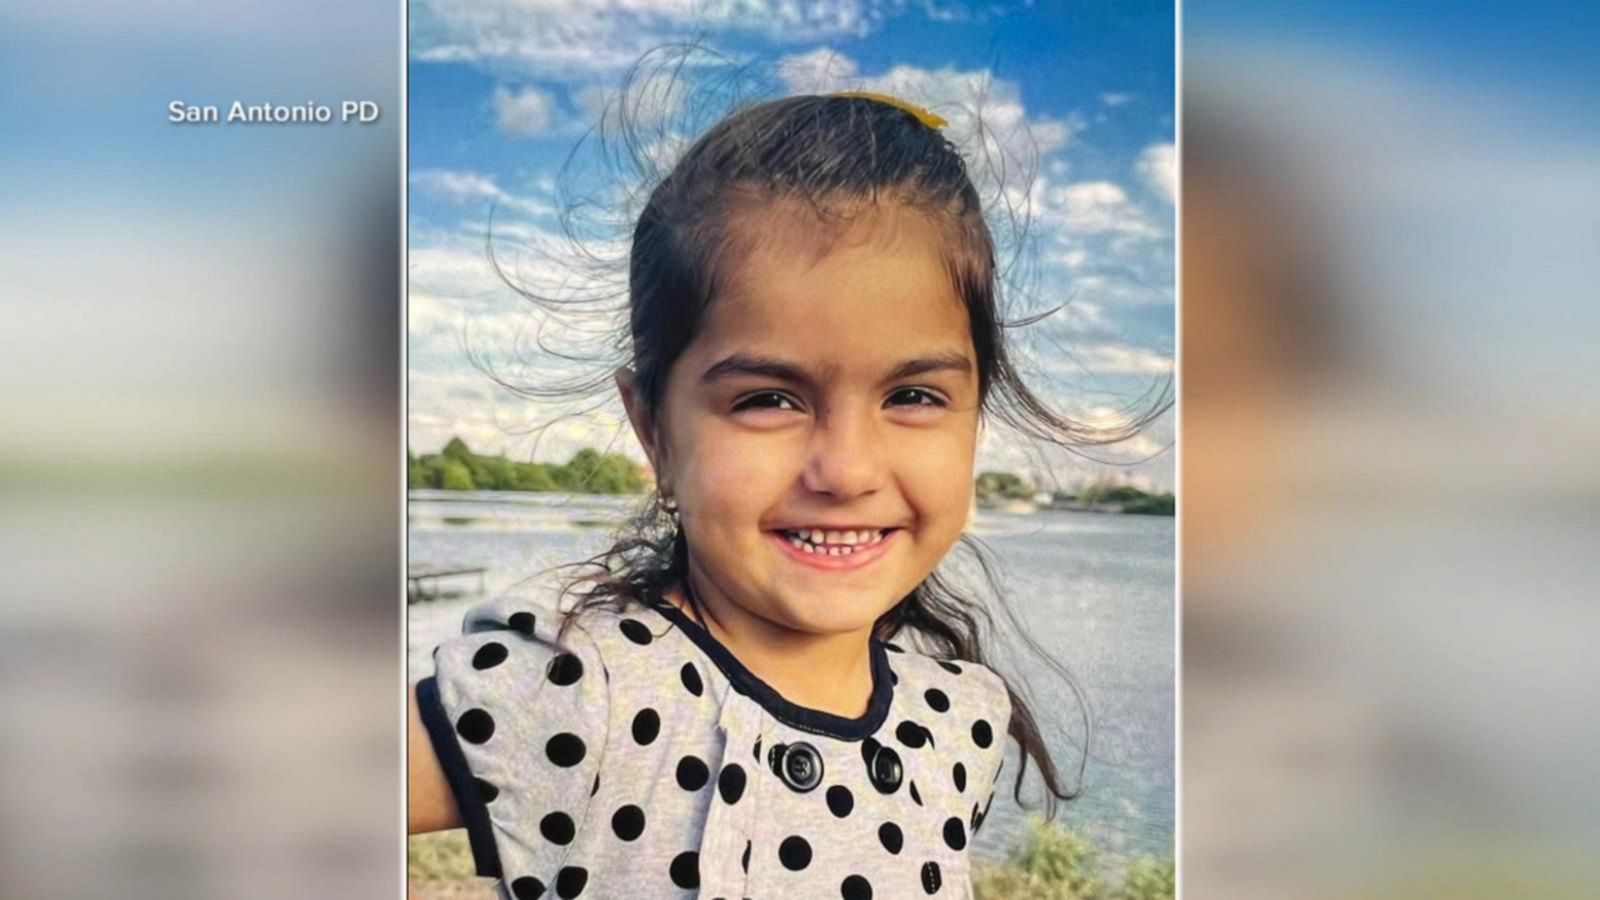 Fbi Joins Search For 3 Year Old Who Vanished From Playground Good